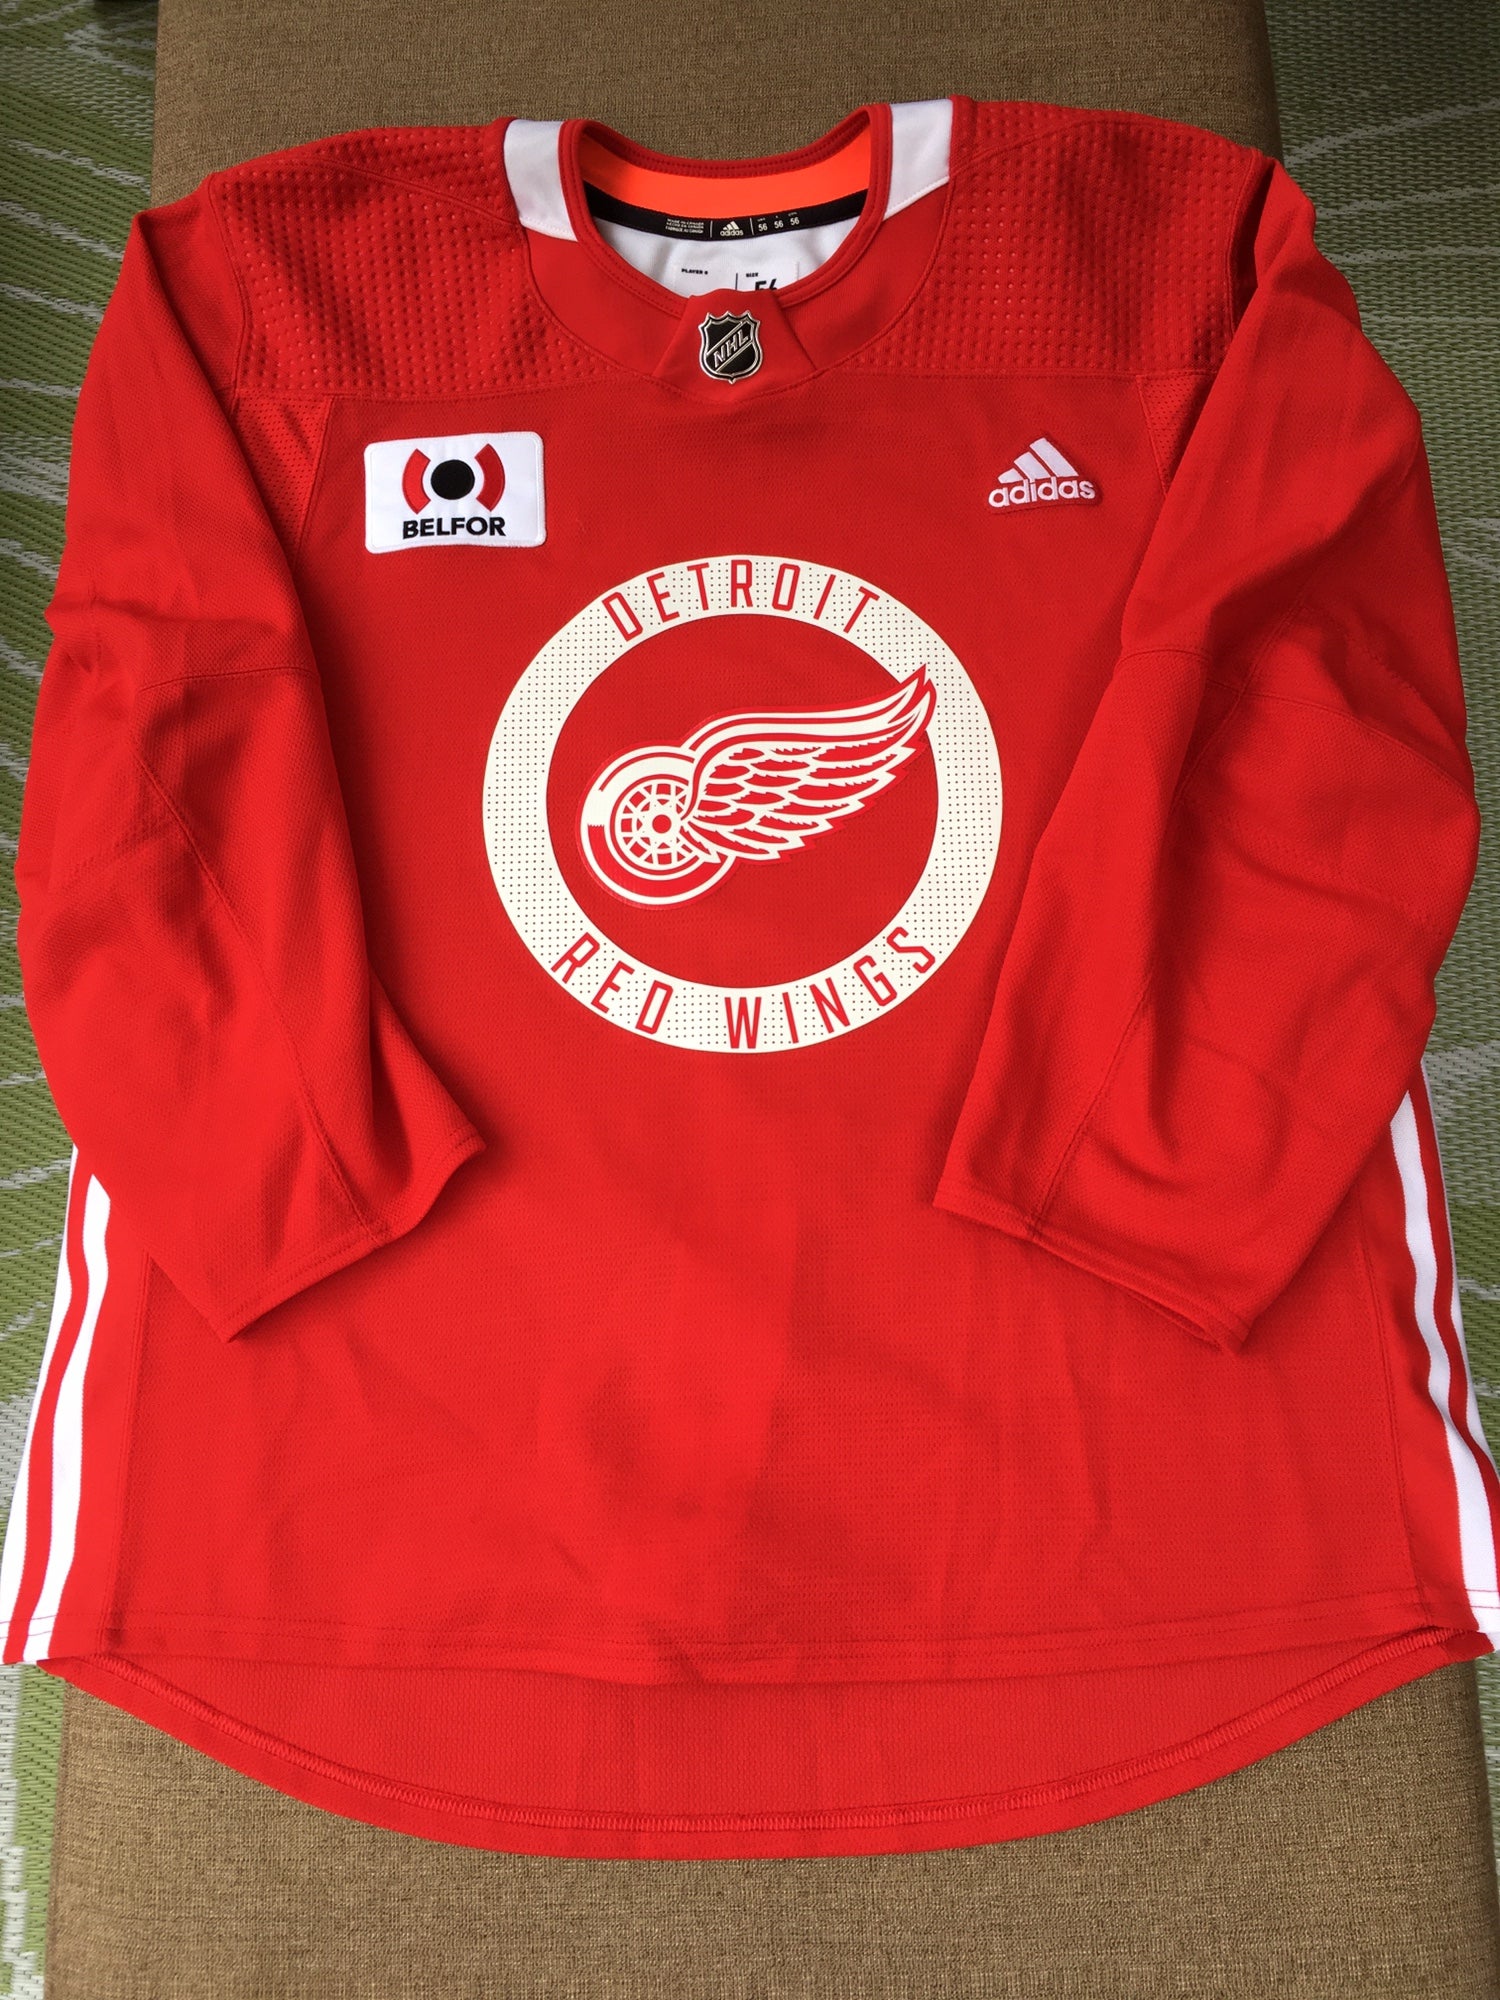 NWT MiC Adidas Detroit Red Wings Reverse Retro Authentic Hockey Jersey,  Size 56